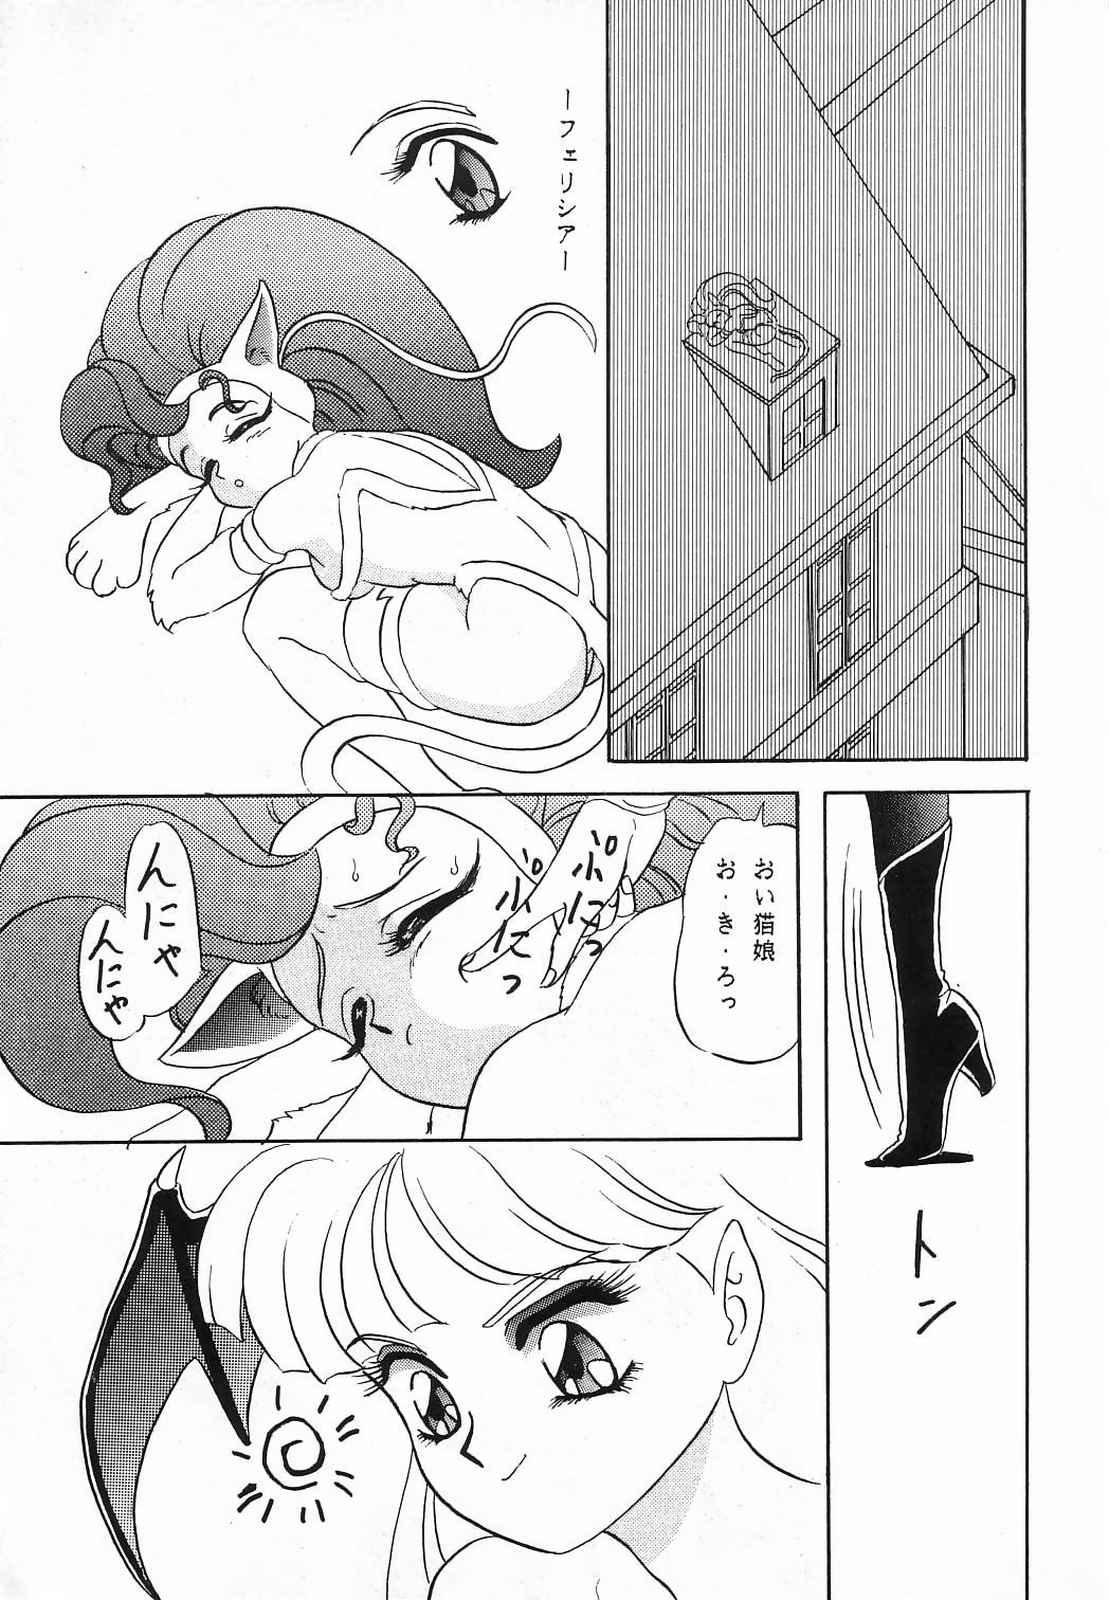 Gay Hardcore Lunch Box 10 - Lunch Time 2 - Sailor moon Darkstalkers Gay Shorthair - Page 7